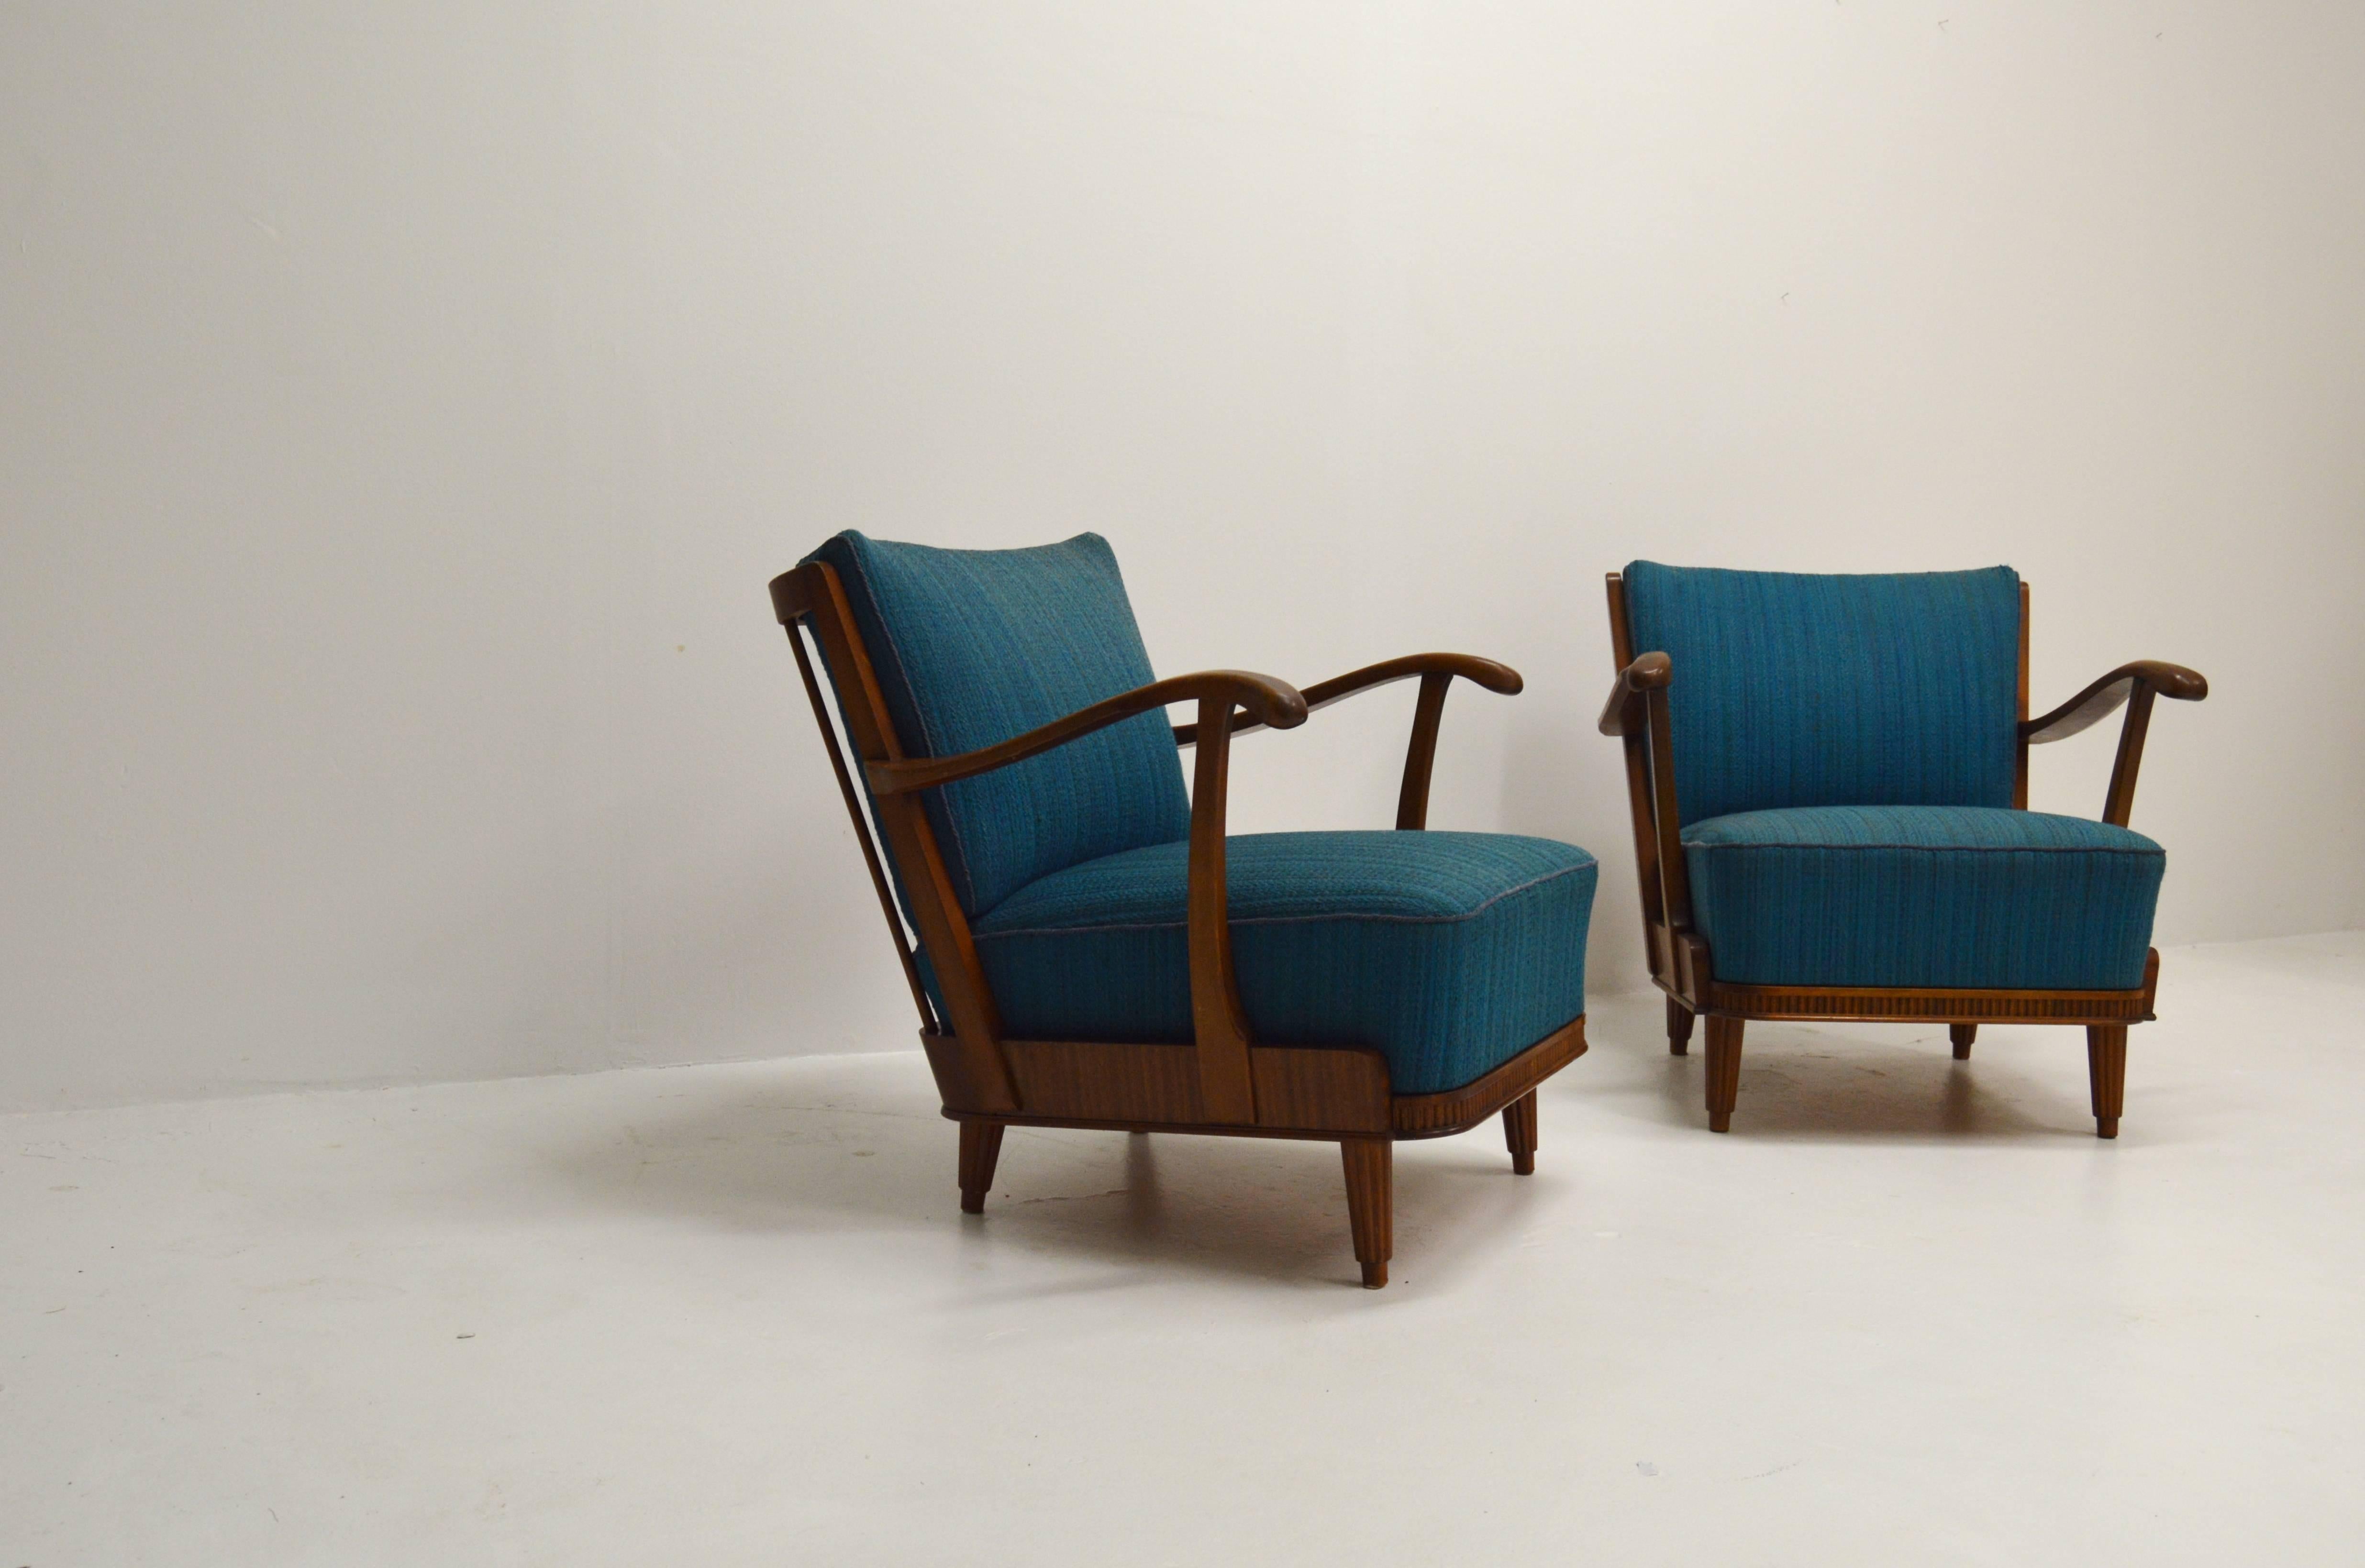 Mid-20th Century Pair of Svante Skogh Mahogany Lounge Chairs For Sale